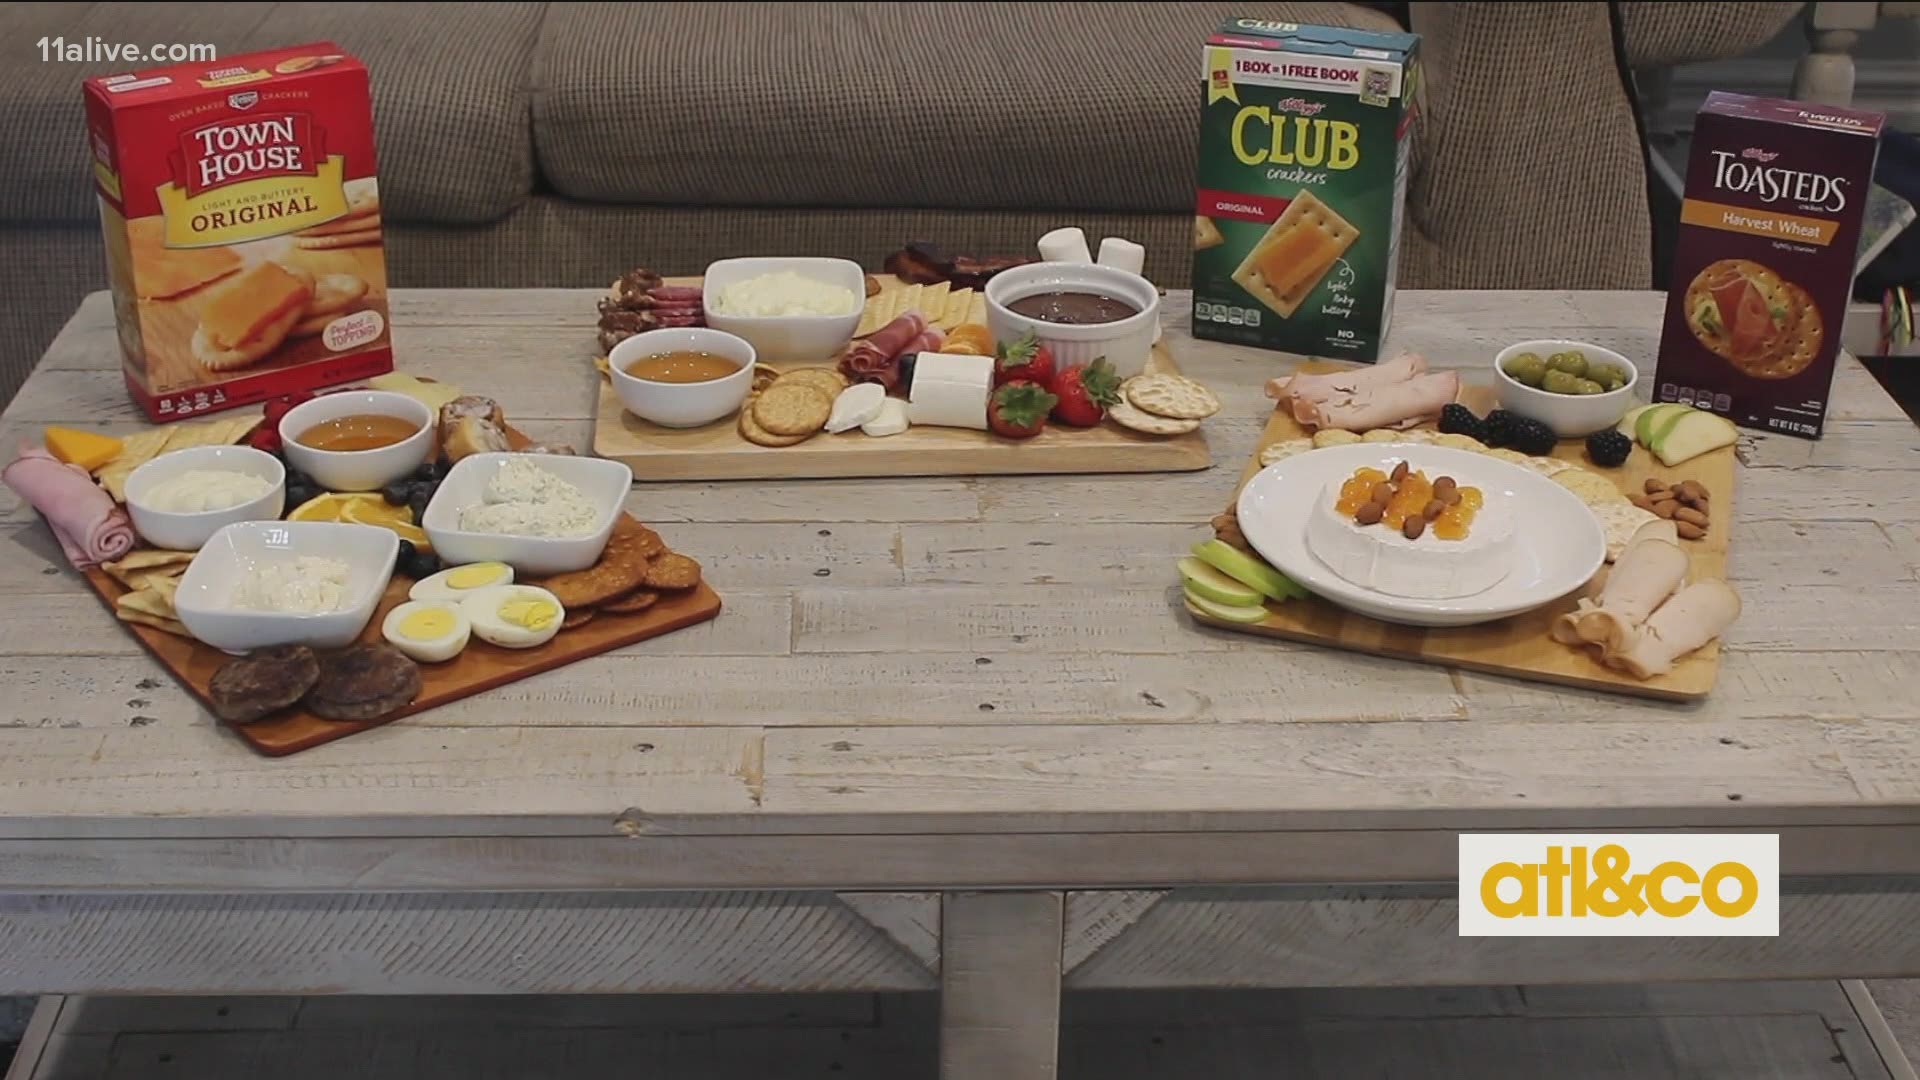 Taste platter perfection! Enjoy these yummy shortcuts from Kellogg's.